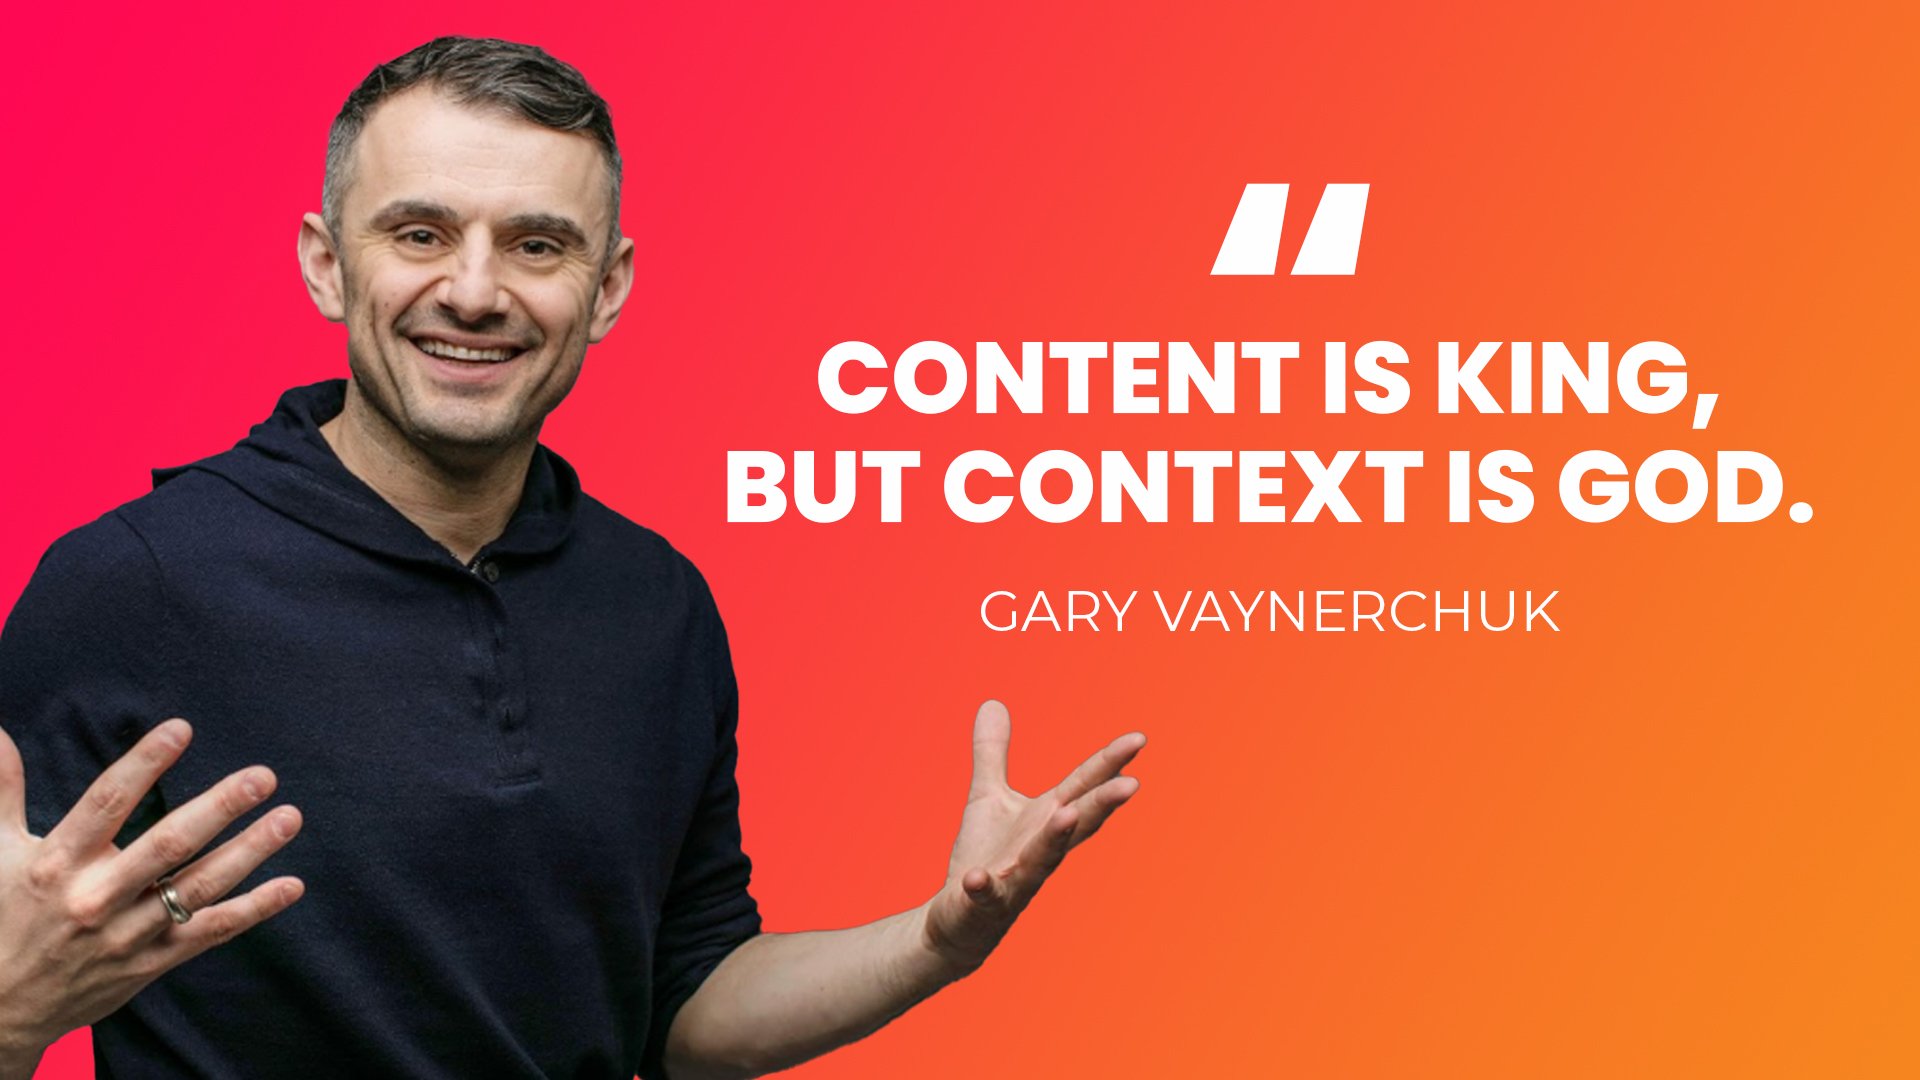 Content is king but context is God